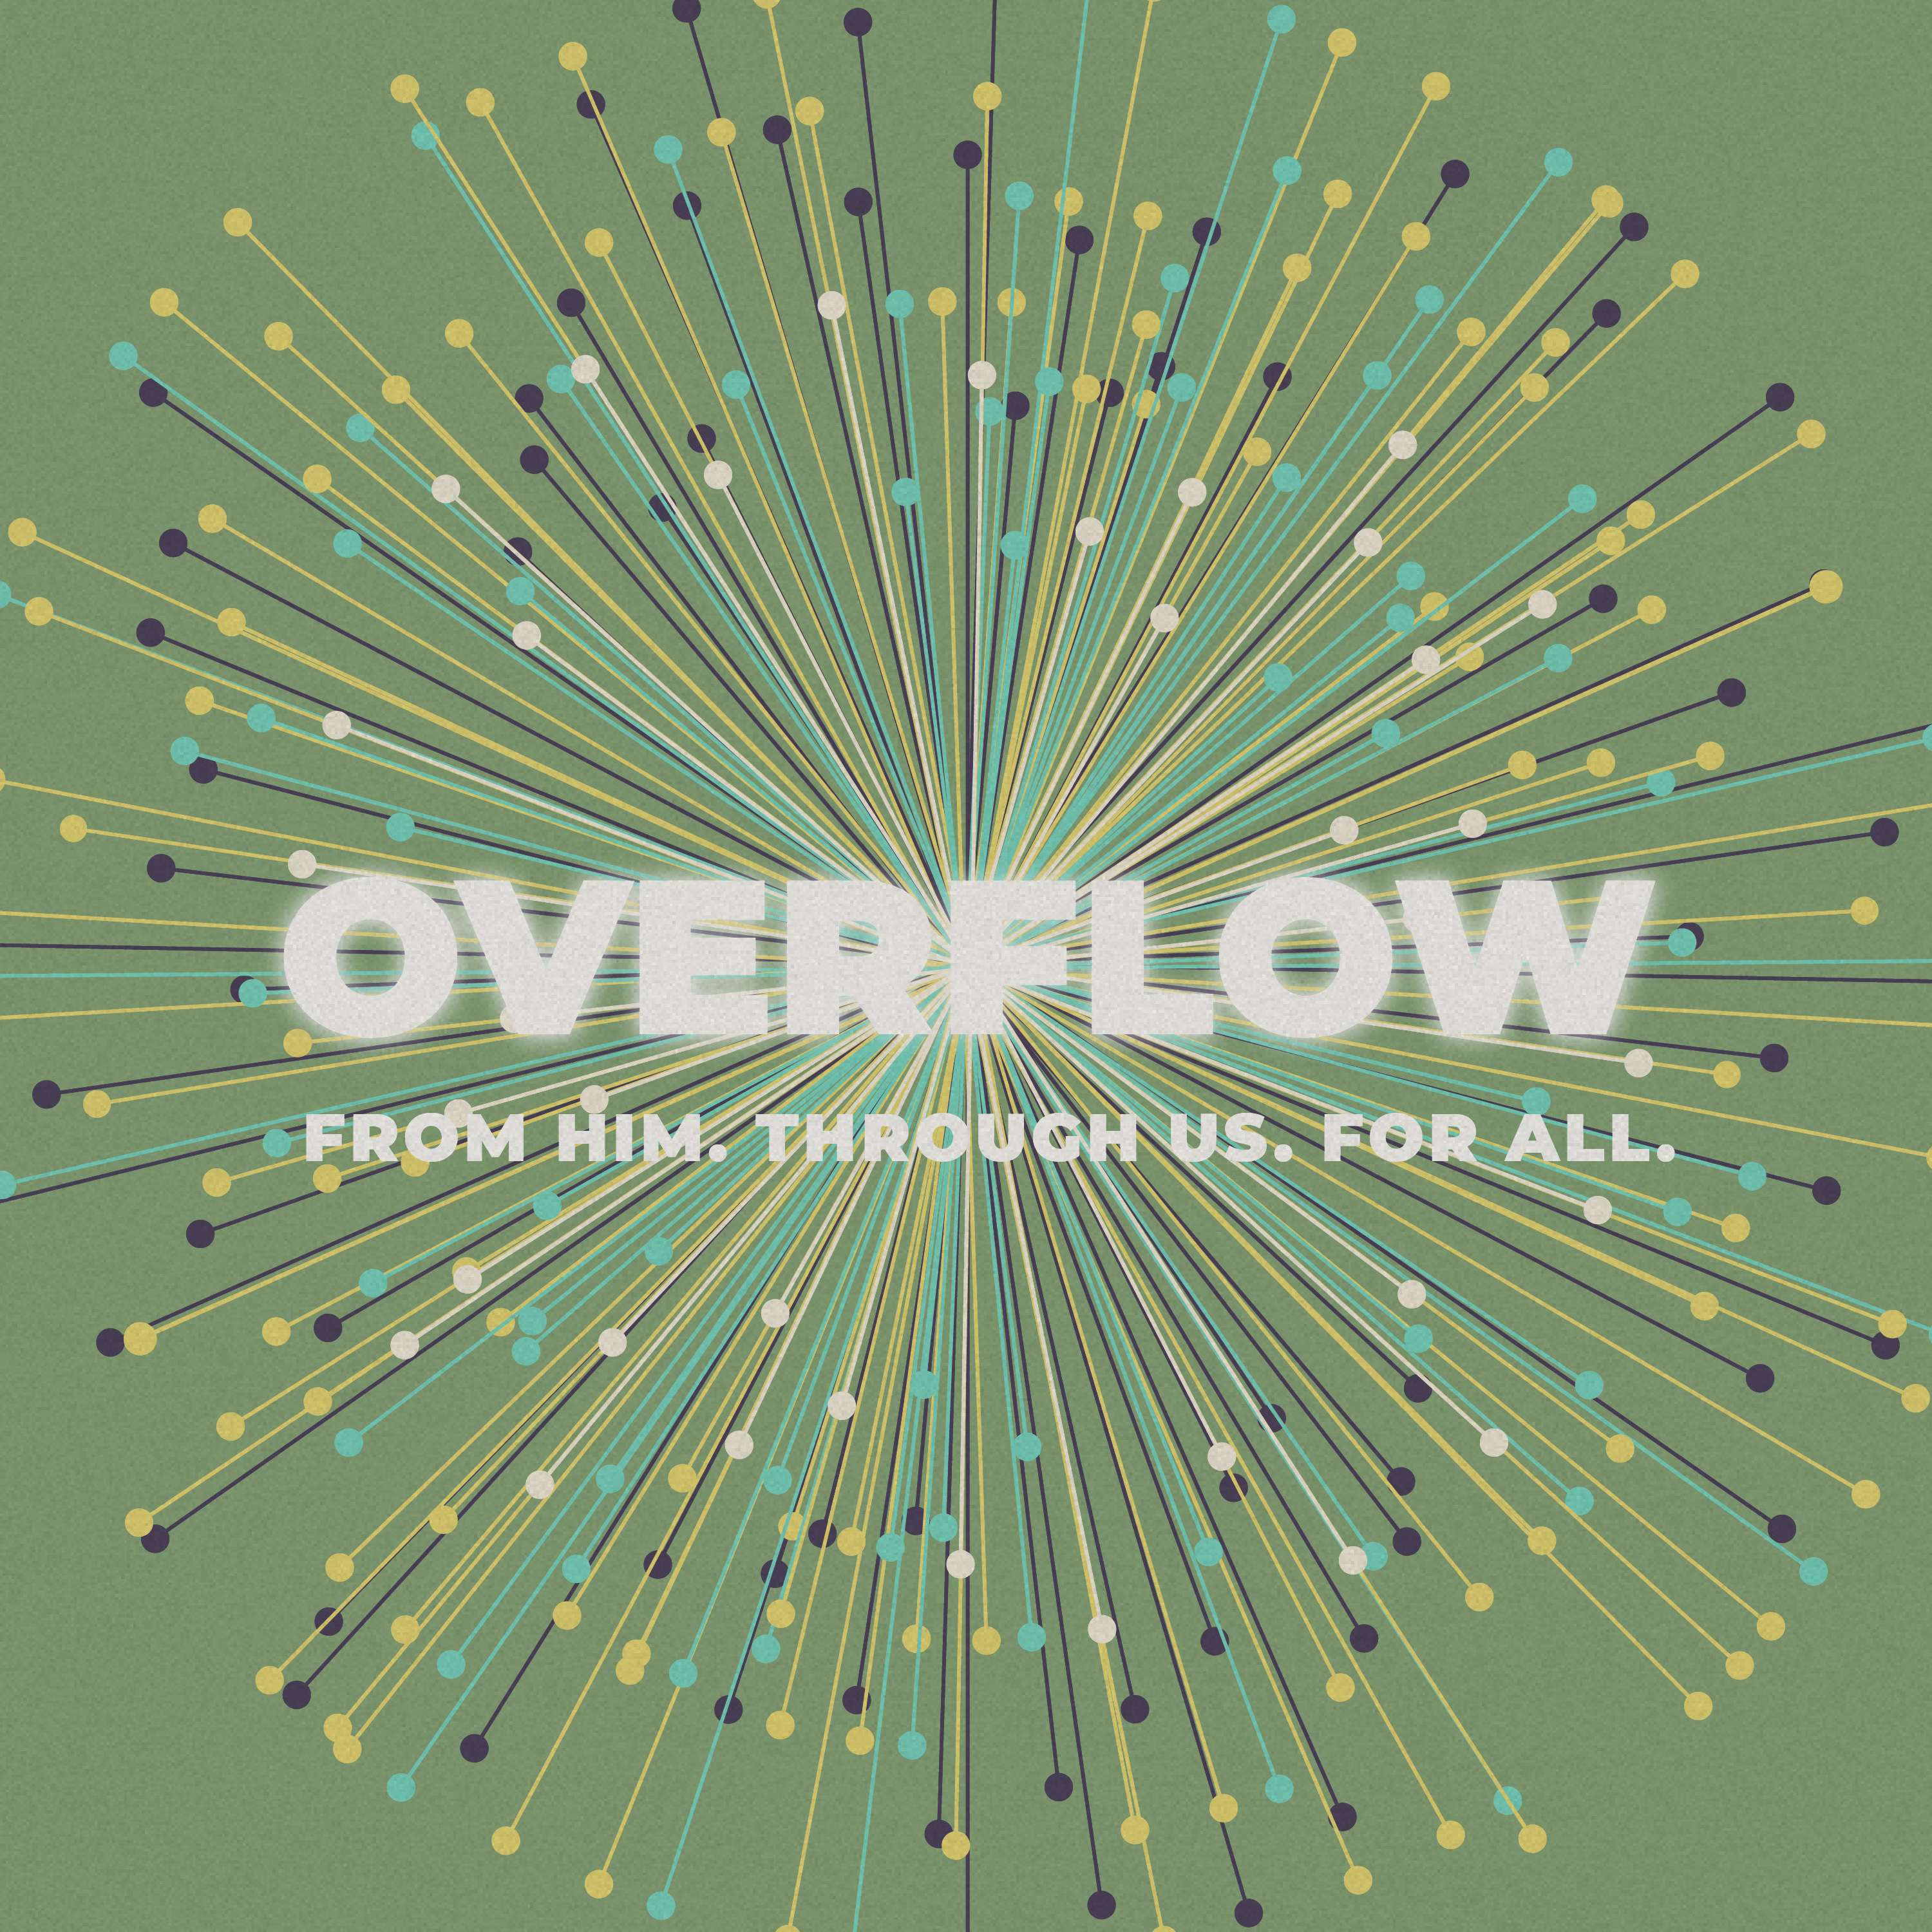 Overflow: For Him, Through Us, For All: Giving and Partnership - Part 3 - Woodside Bible Church